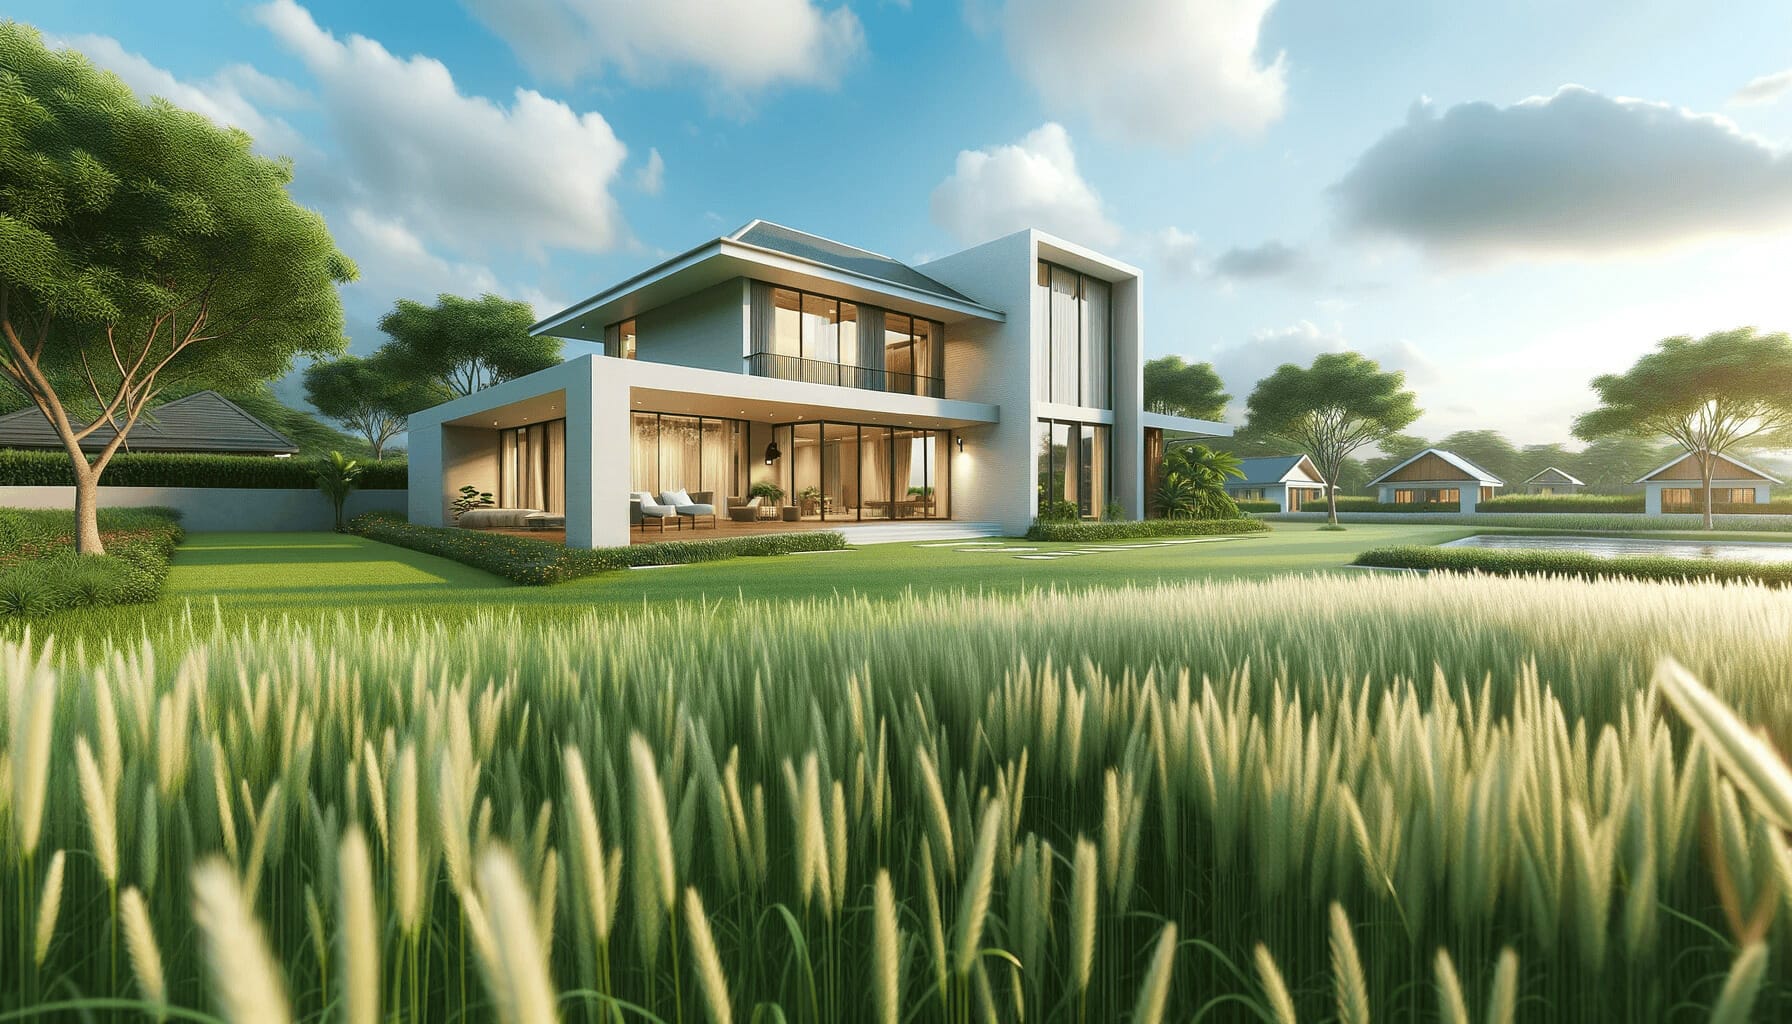 DALL·E 2023 10 16 13.43.38 Photo of a newly built modern home on an individual plot of land with a foreground of green grass and a clear sky